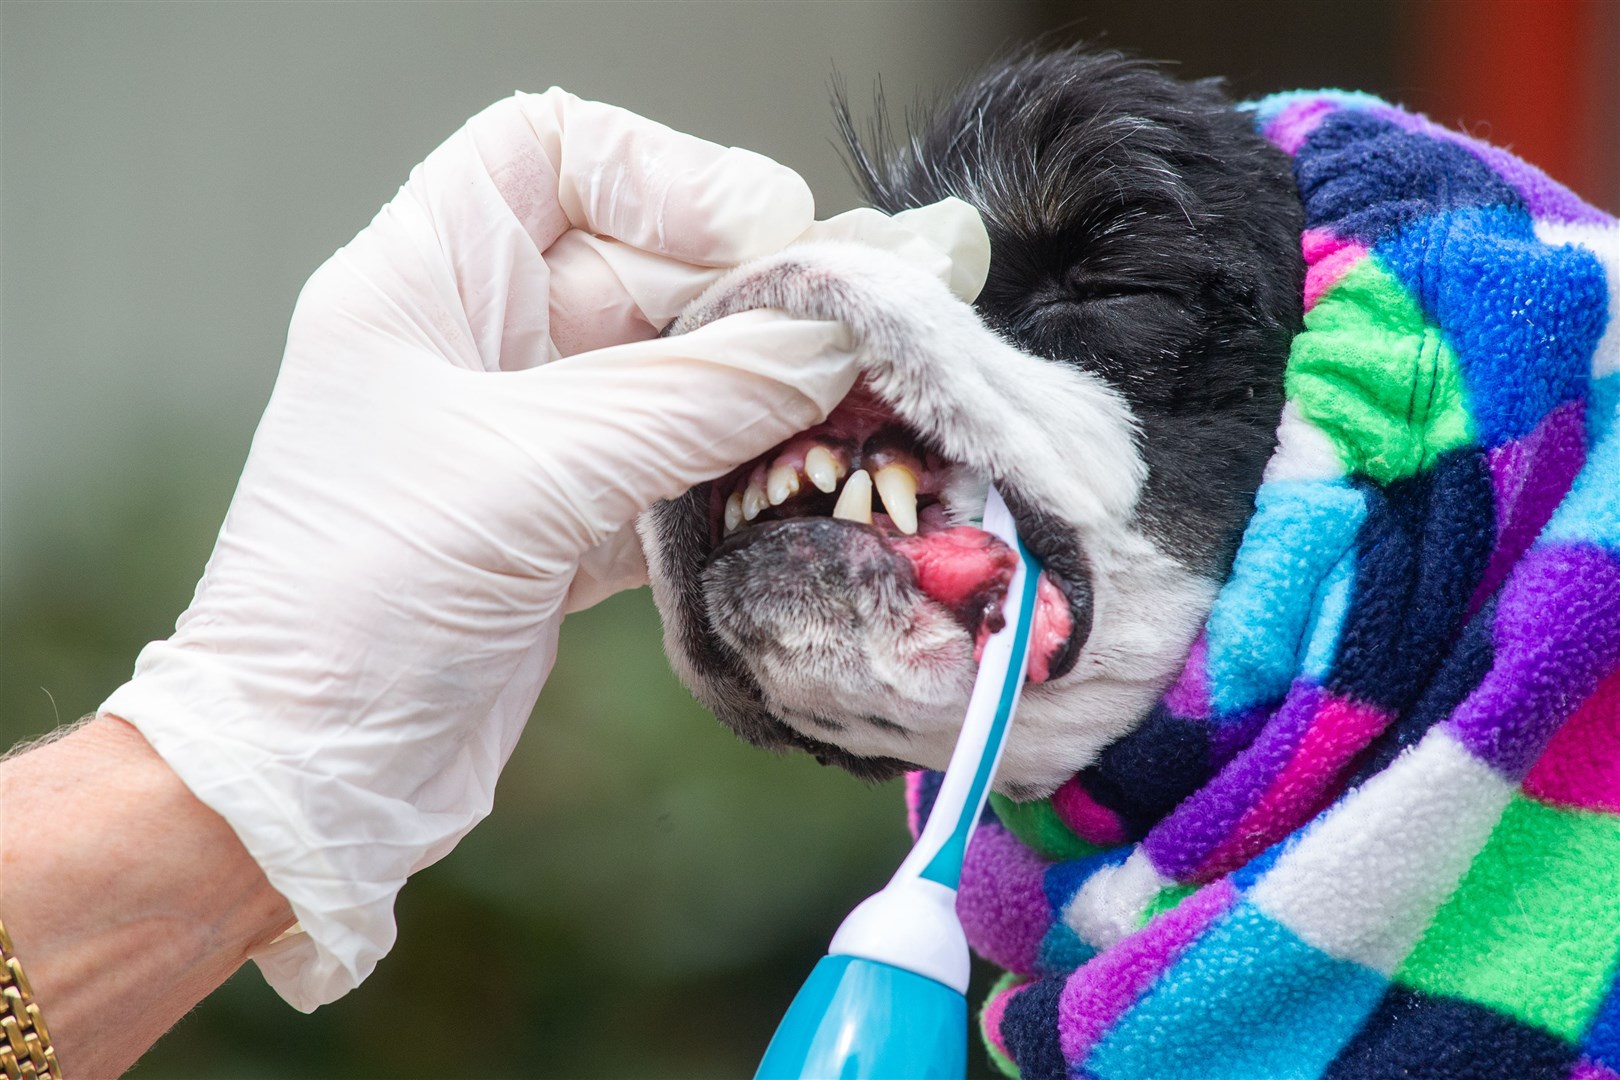 Aileen Toynton of K9 Clean Coats is now selling advanced toothbrushes for dogs. Picture: Daniel Forsyth.